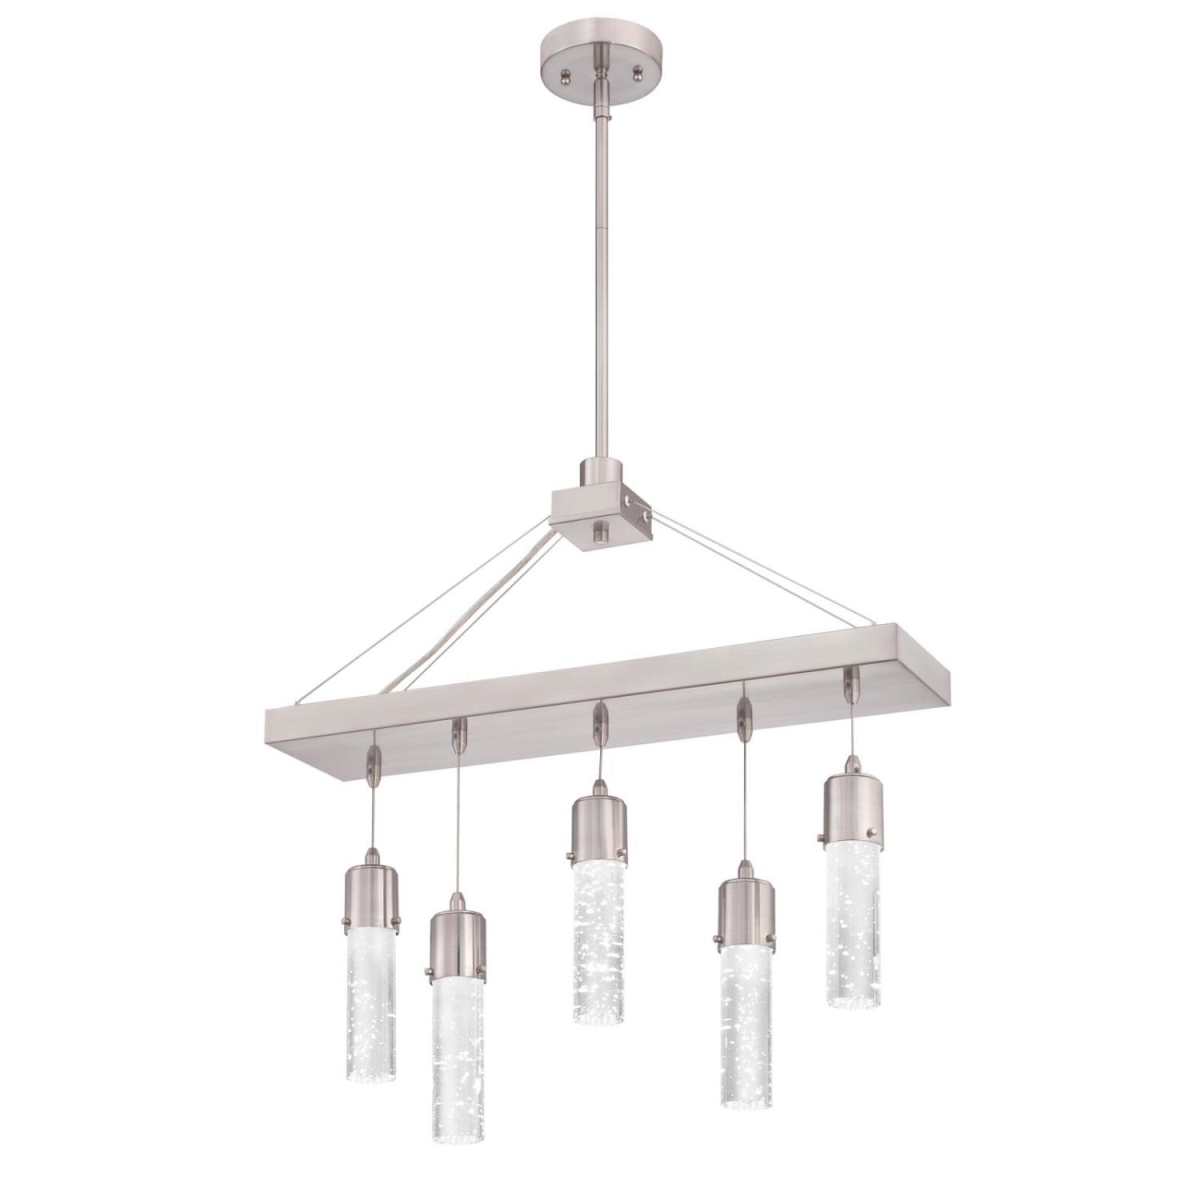 6371900 5 Light Led Chandelier With Bubble Glass - Brushed Nickel